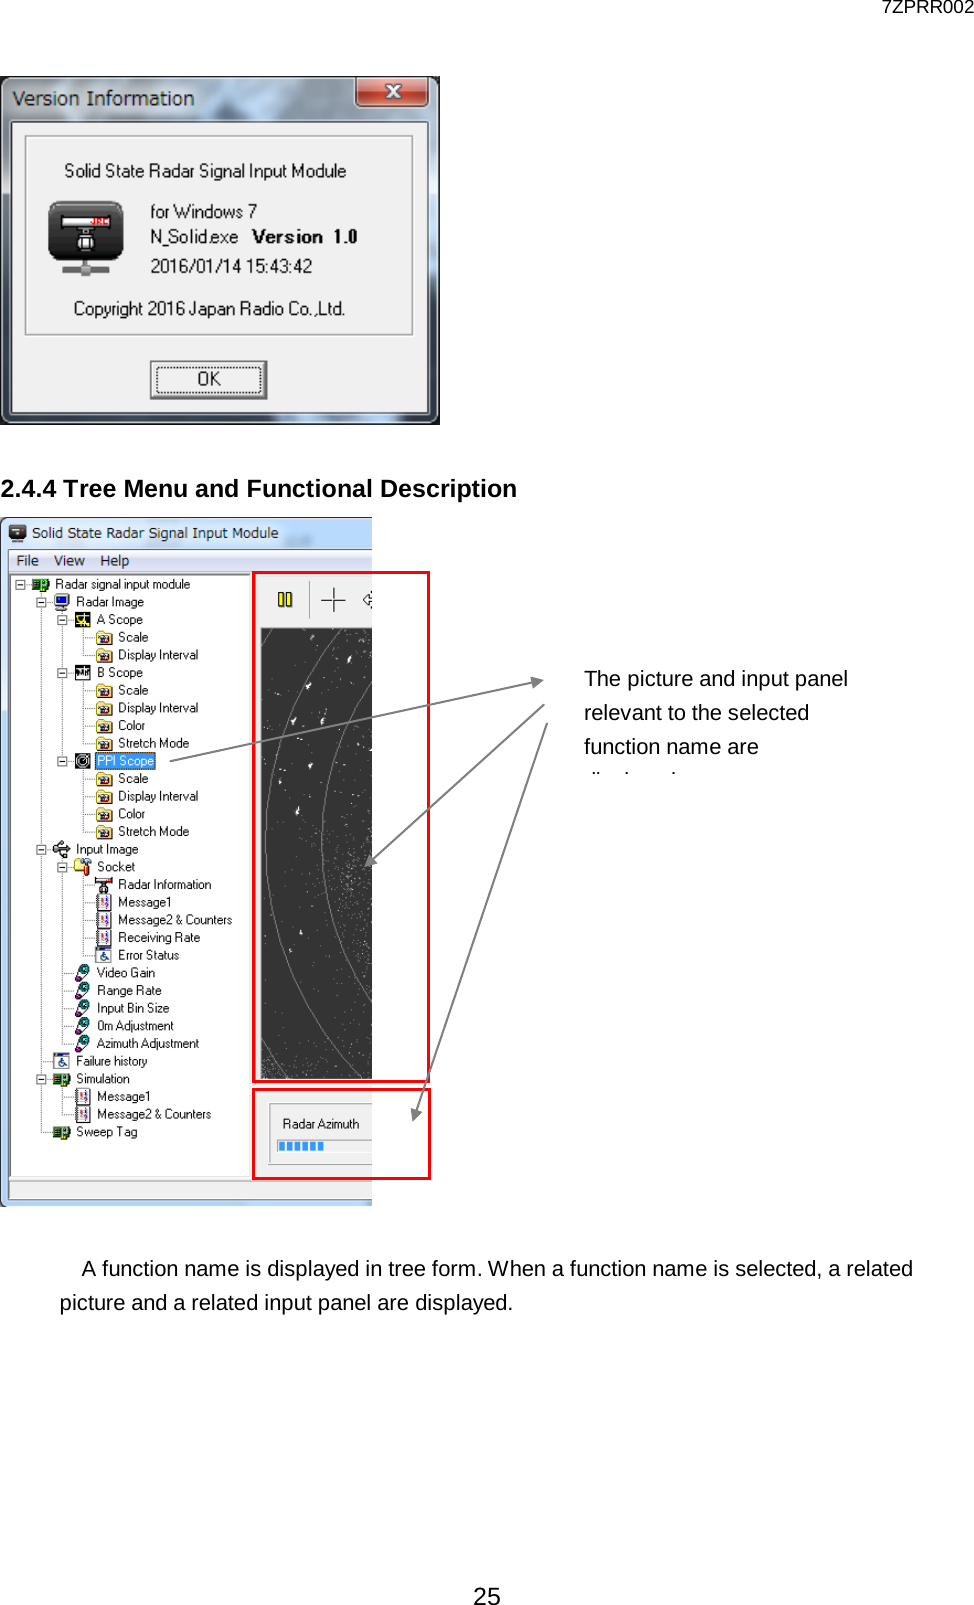  7ZPRR002 25   2.4.4 Tree Menu and Functional Description    A function name is displayed in tree form. When a function name is selected, a related picture and a related input panel are displayed.      The picture and input panel relevant to the selected function name are di l d    